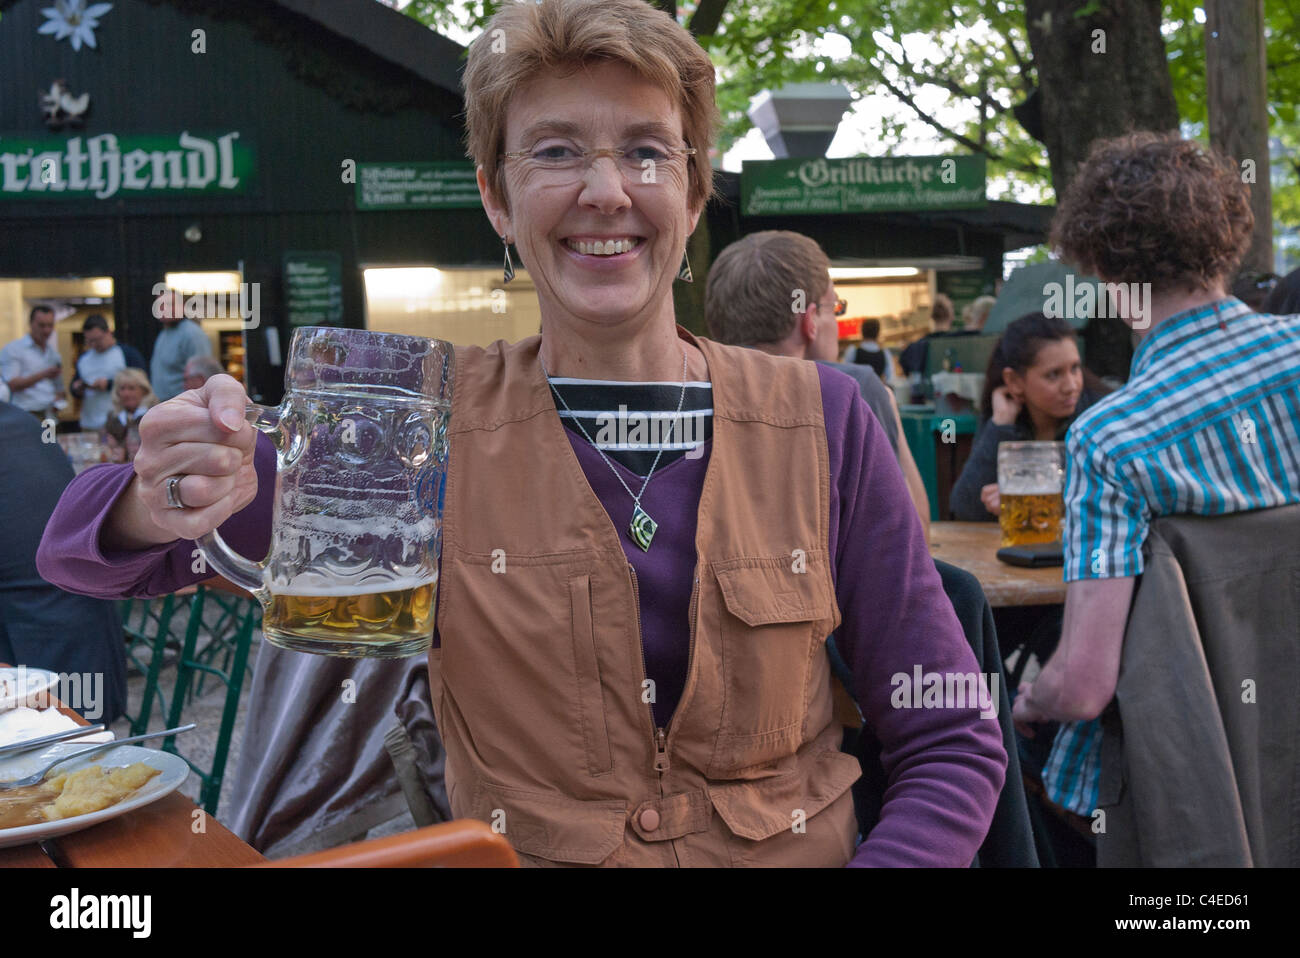 A female tourist drinks from a very large beer stein at the Augustiner-Keller beer garden in Munich, Germany. Stock Photo